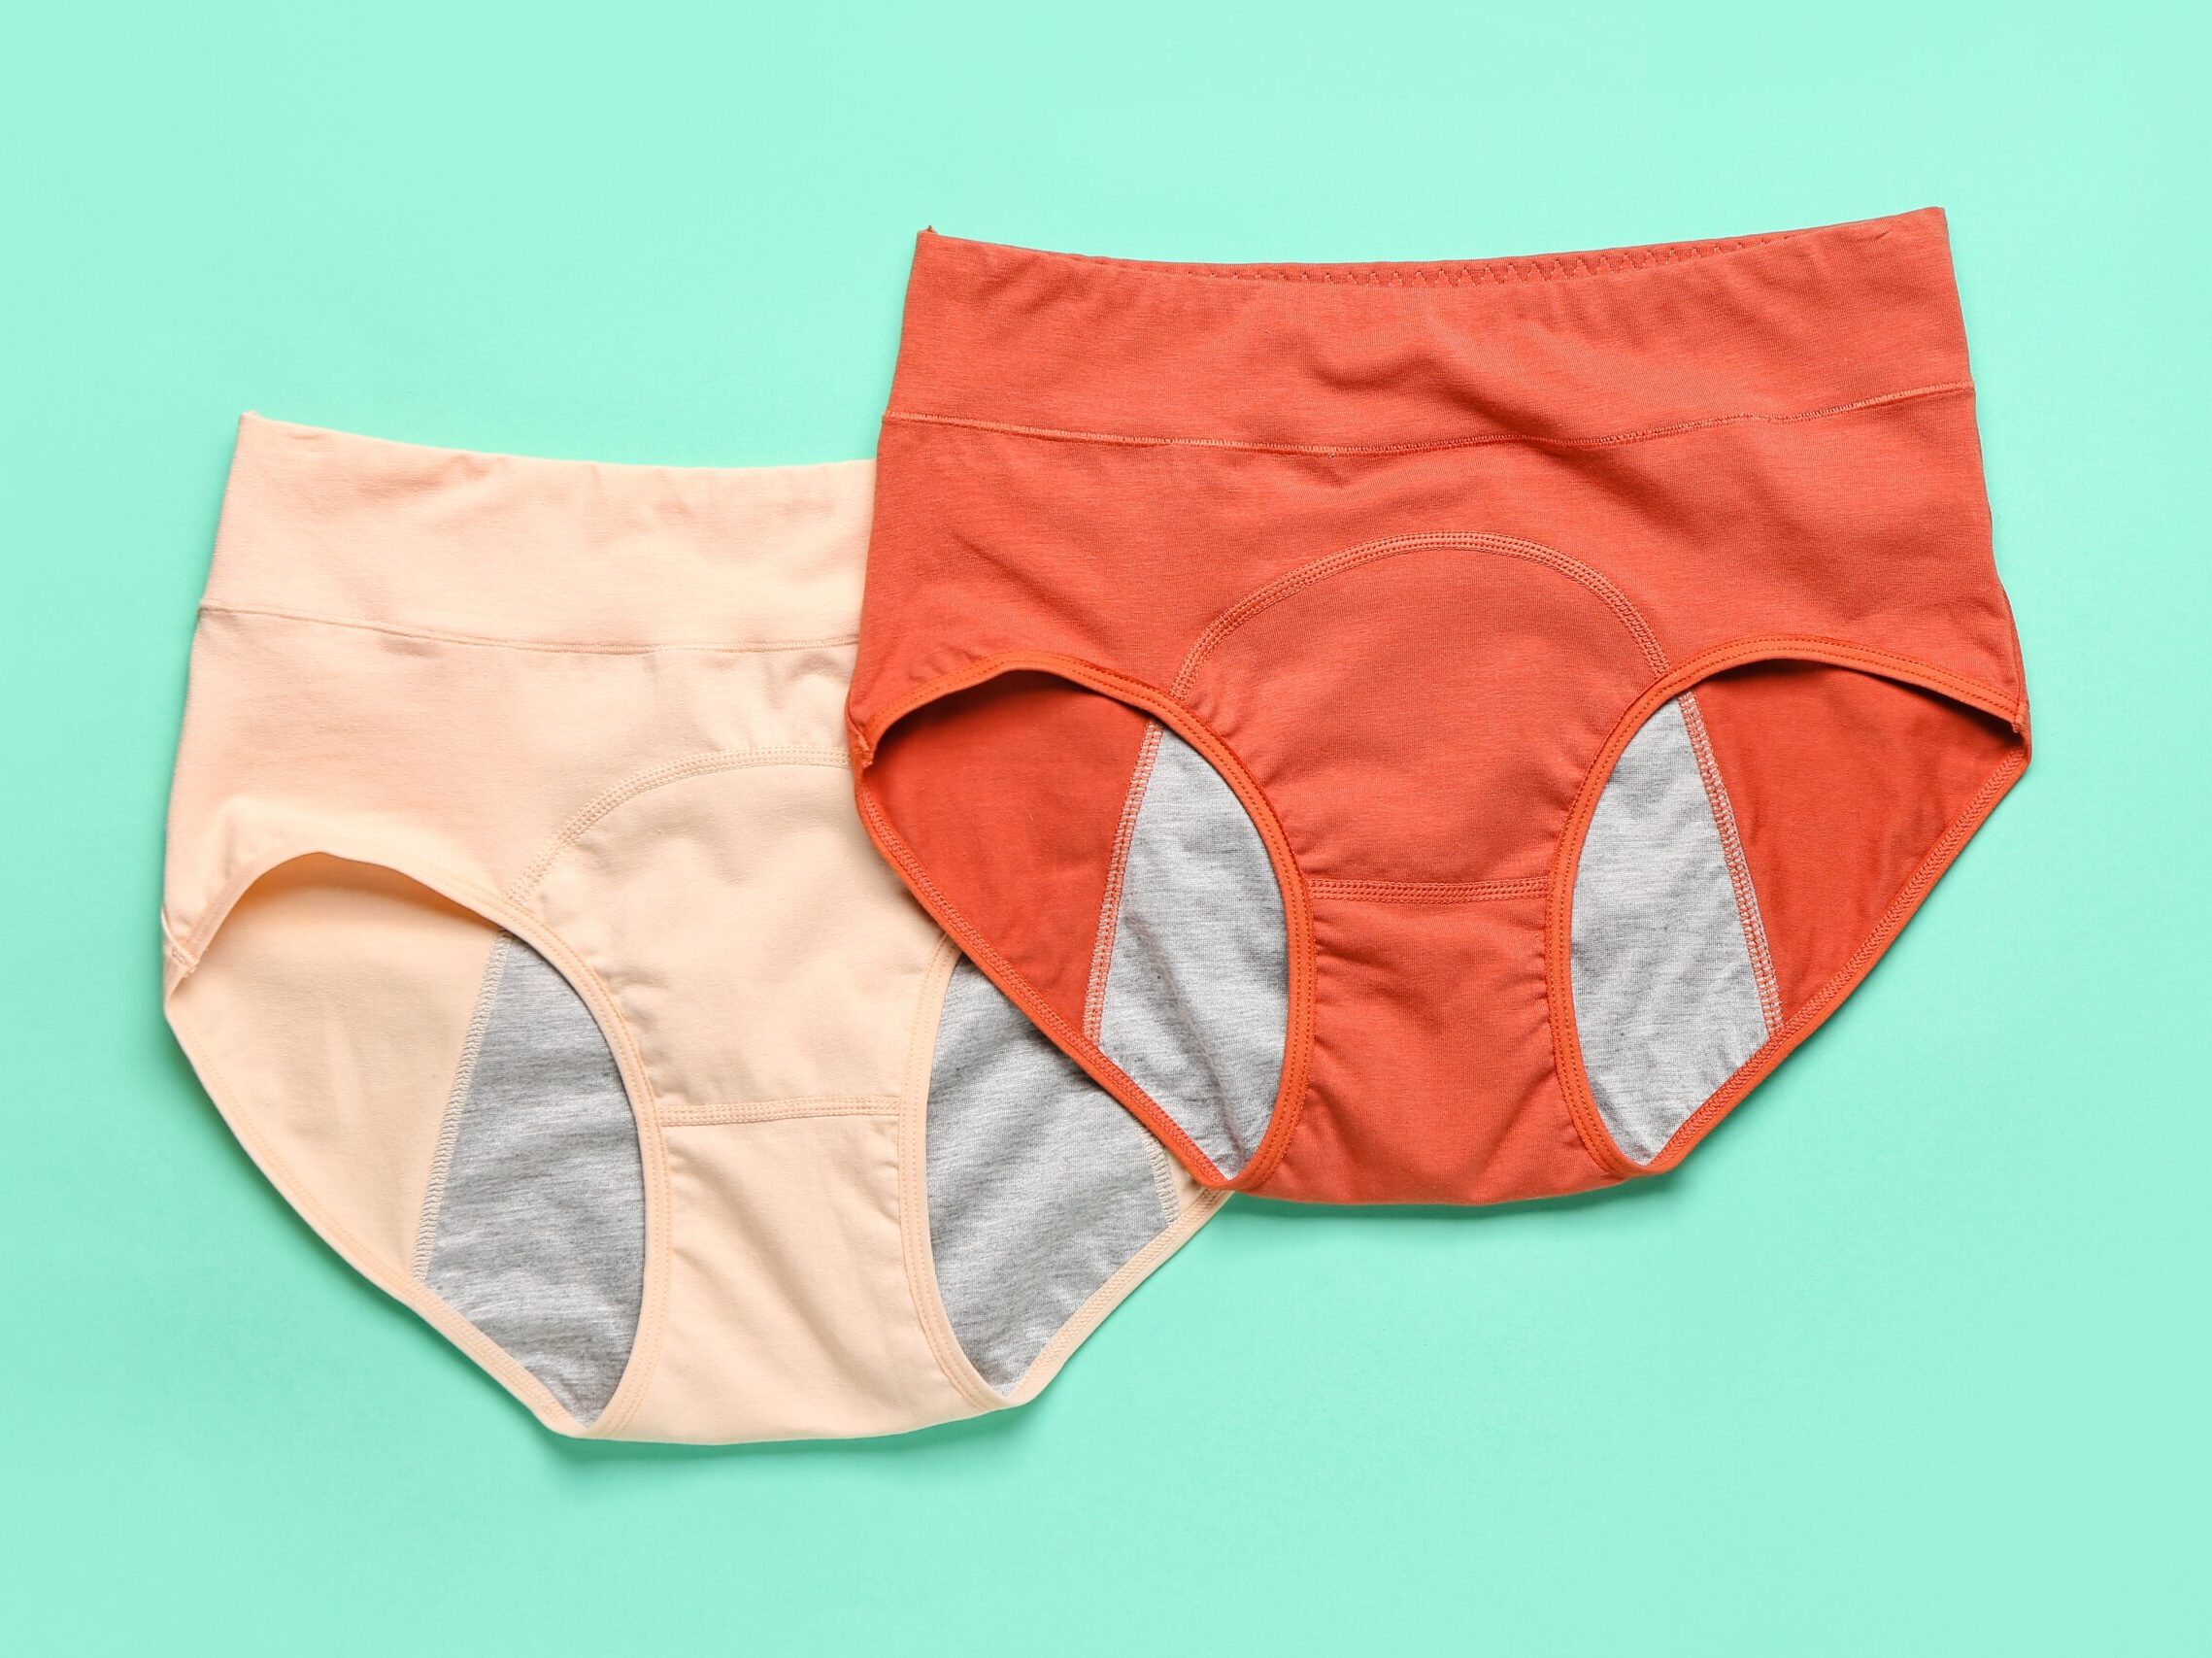 Thinx Settles Class-Action Lawsuit: Here's What You Need To Know